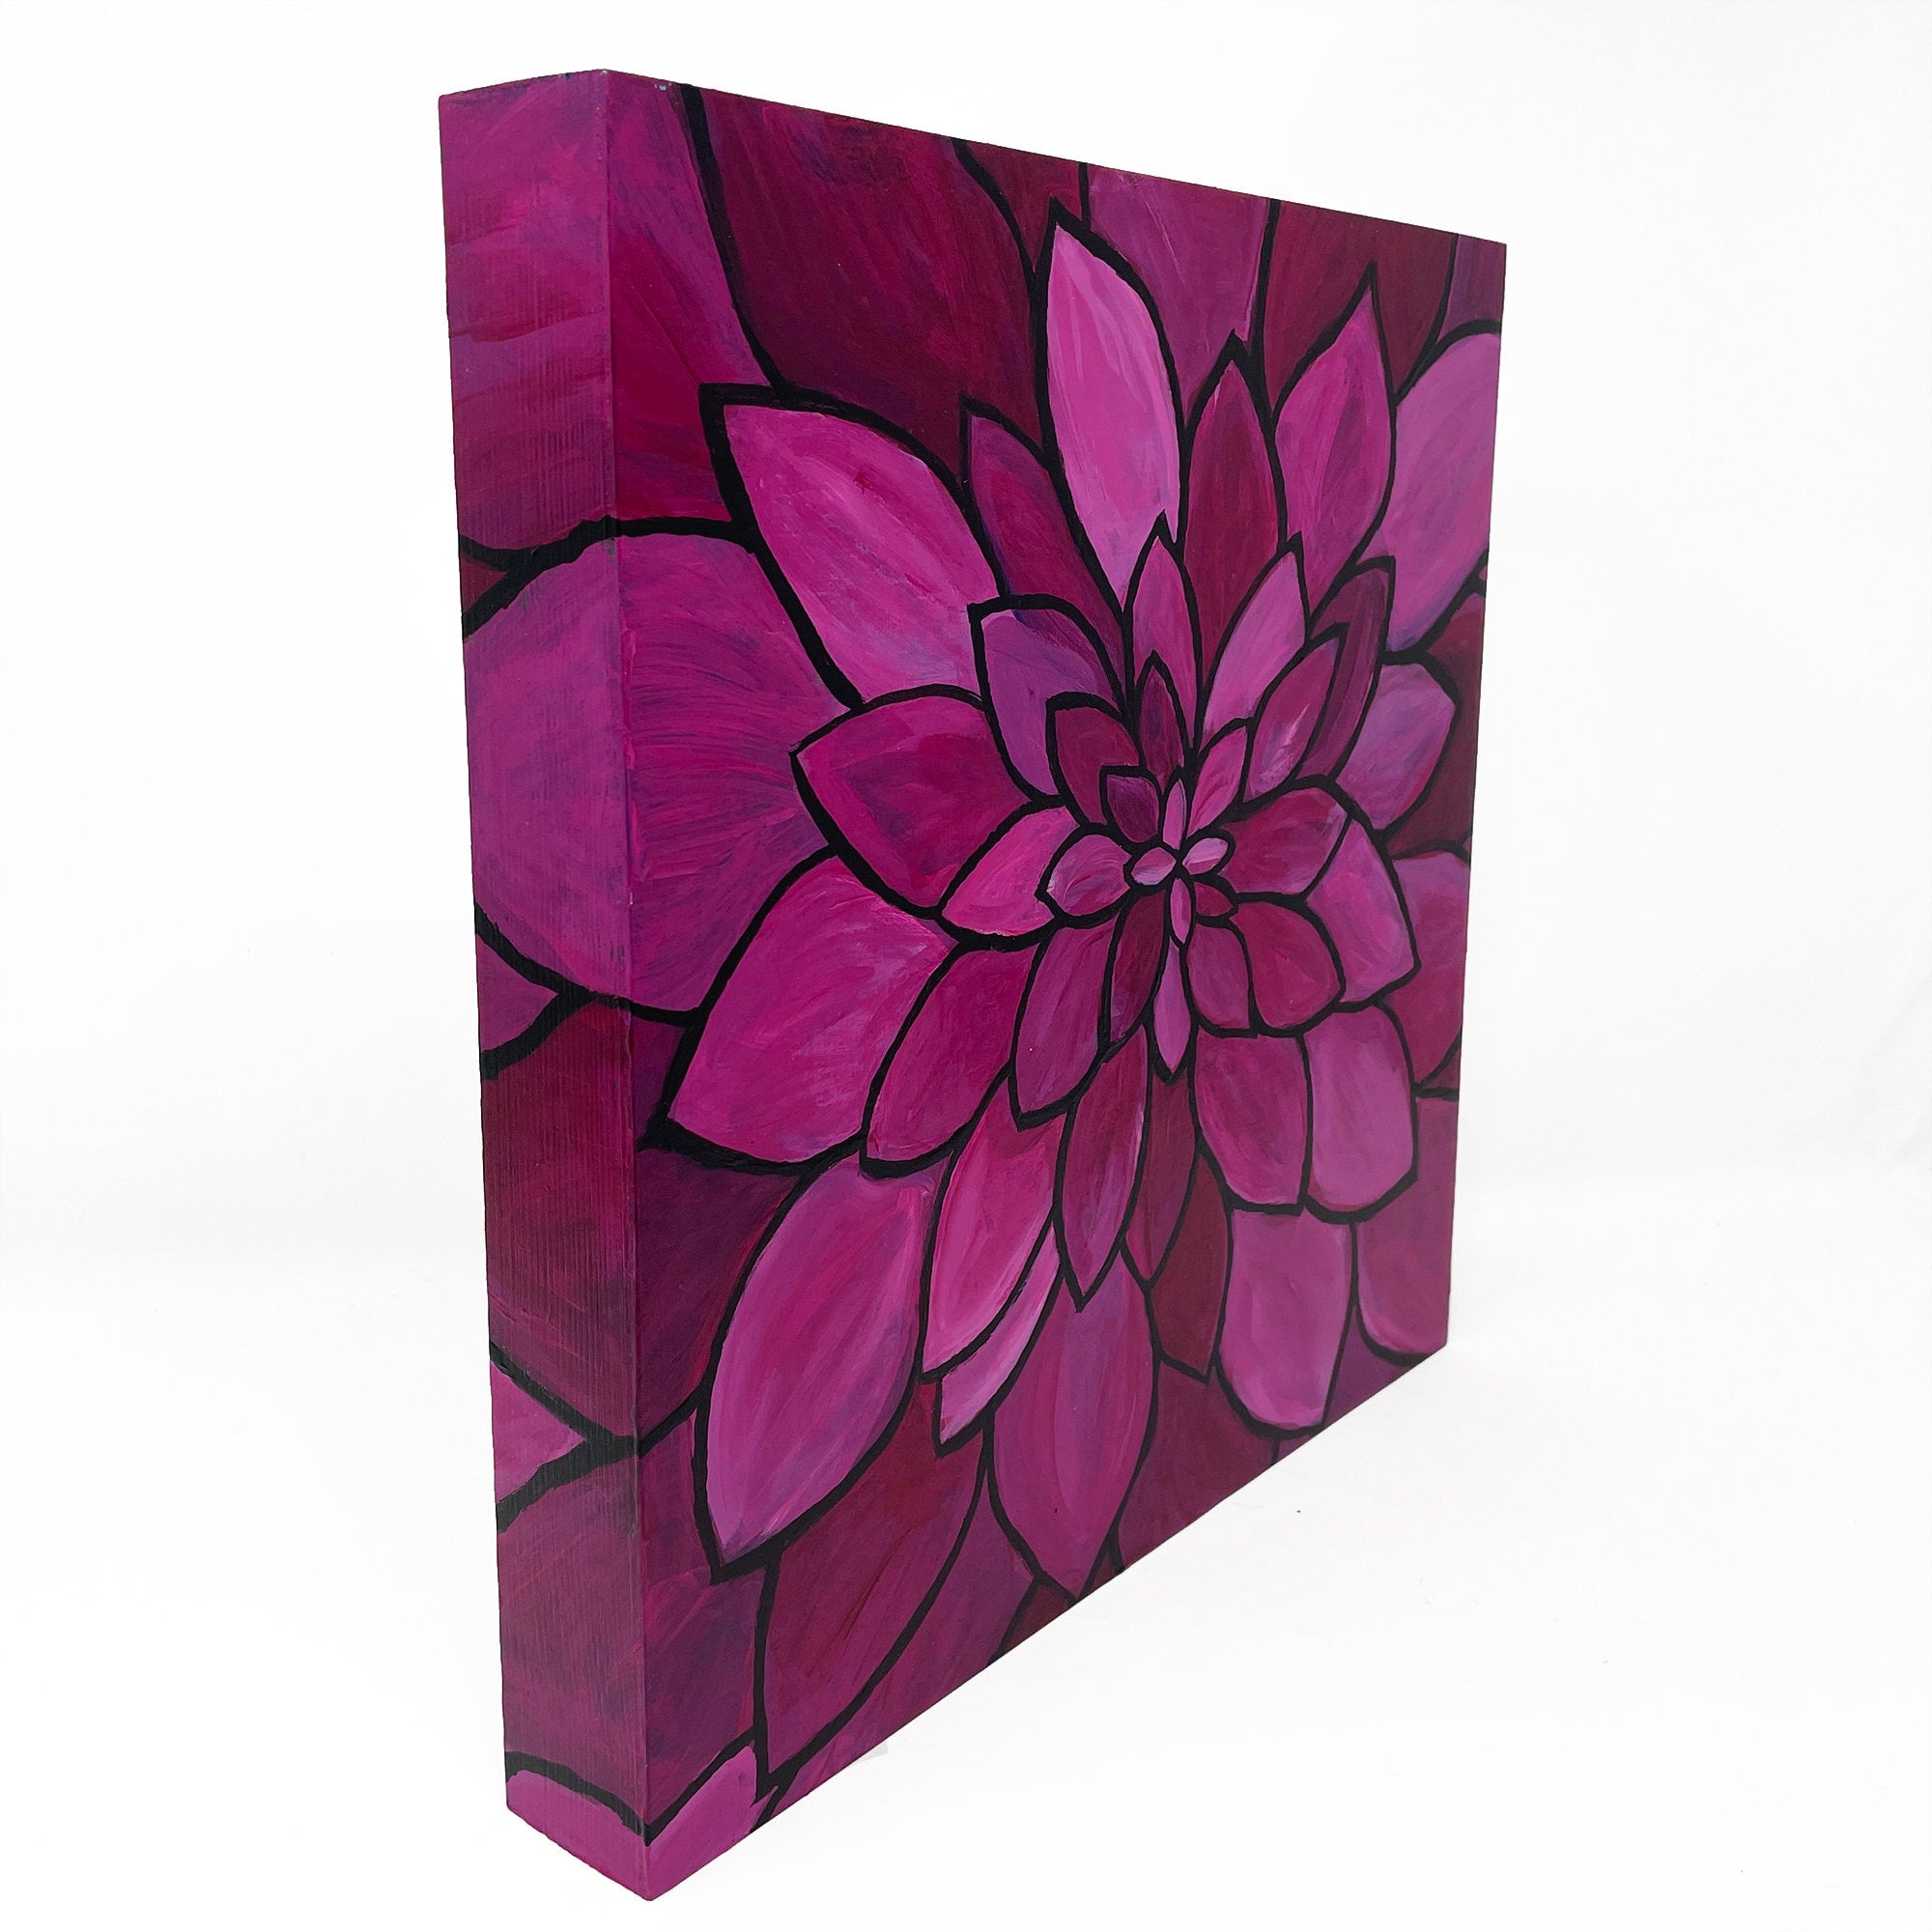 Original Dahlia Painting - Close Up Flower Painting - Square Floral Art - Magenta, Pink Flower - 12x12 inches